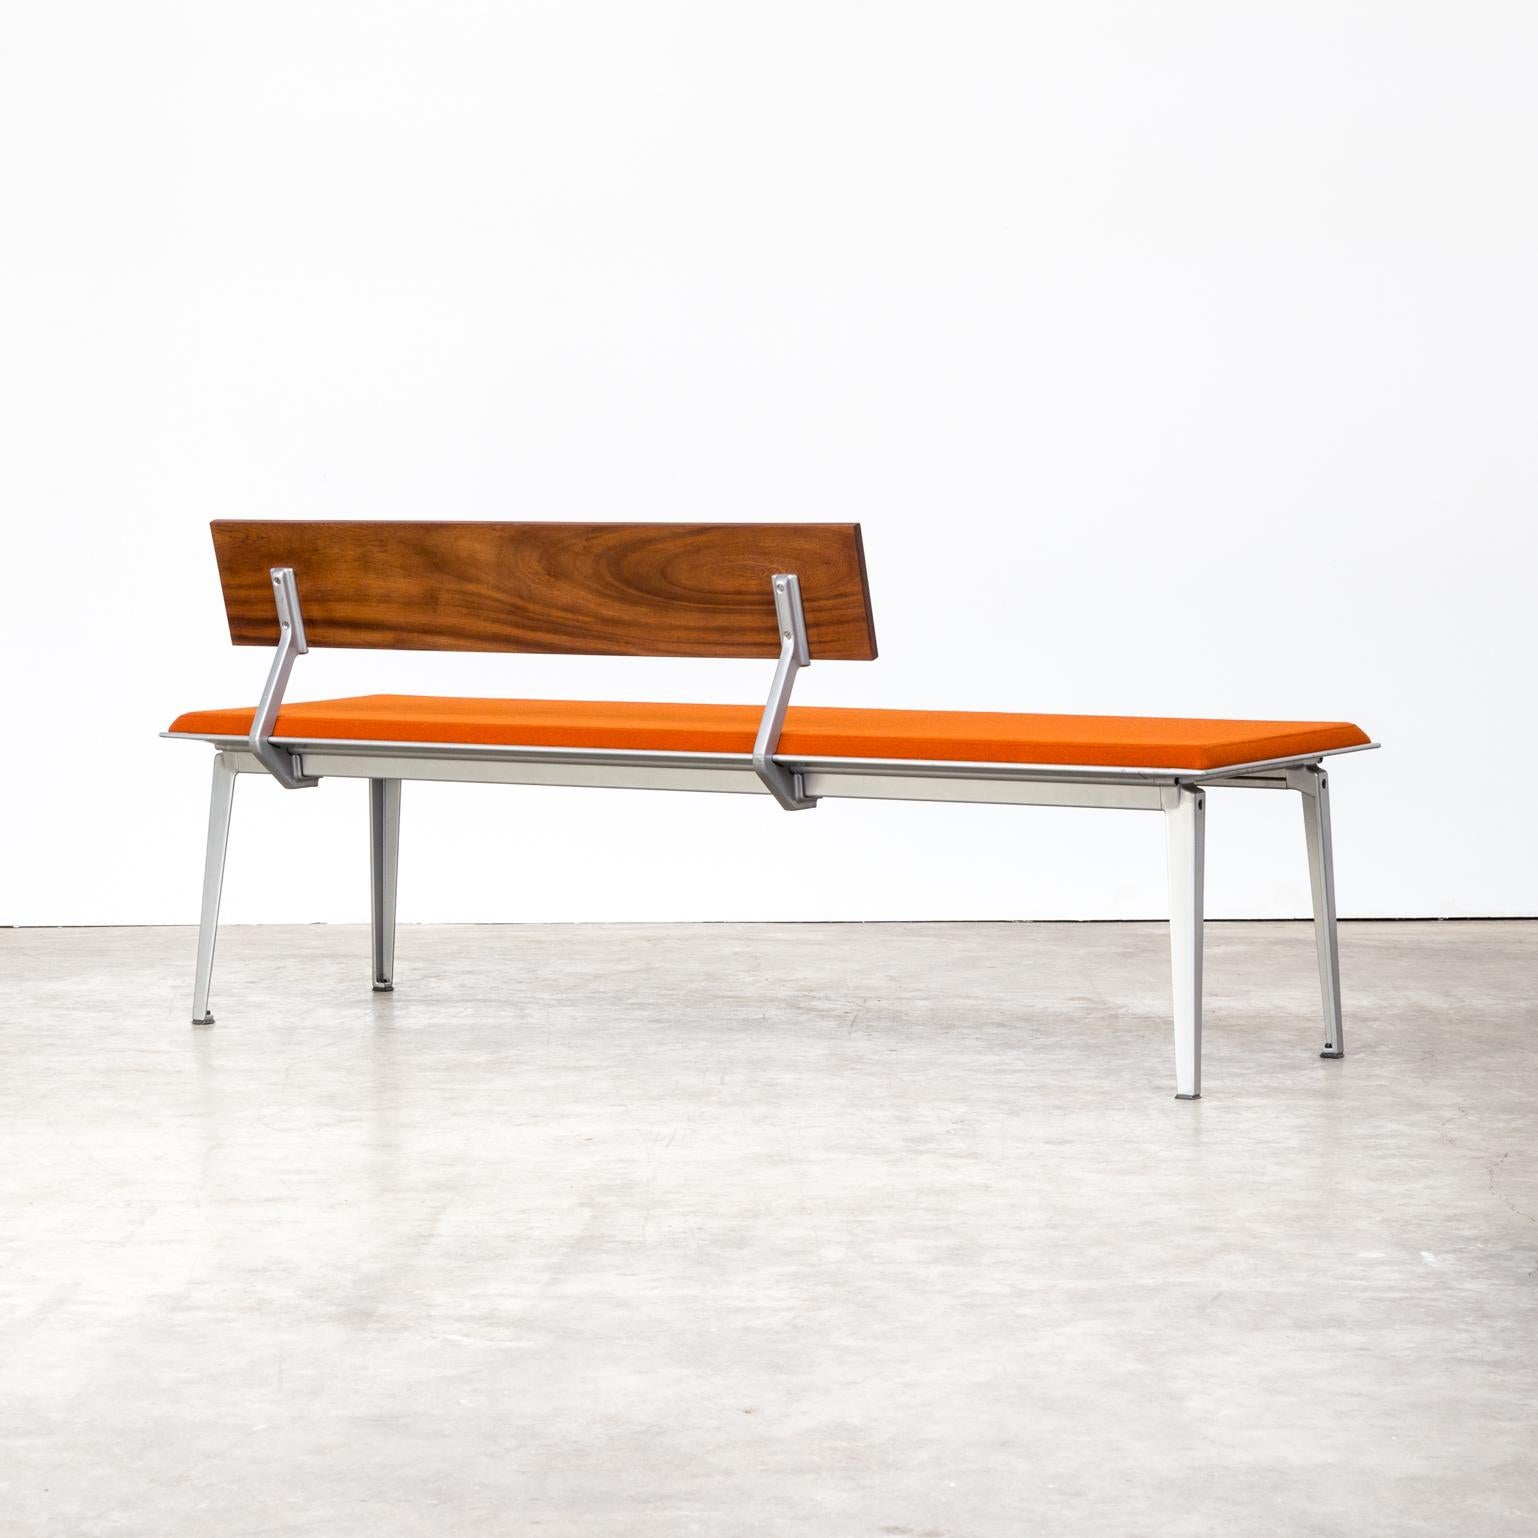 1990s Bas Pruyser ‘Ahrend 600’ Museum Bench for Ahrend de Cirkel For Sale 3